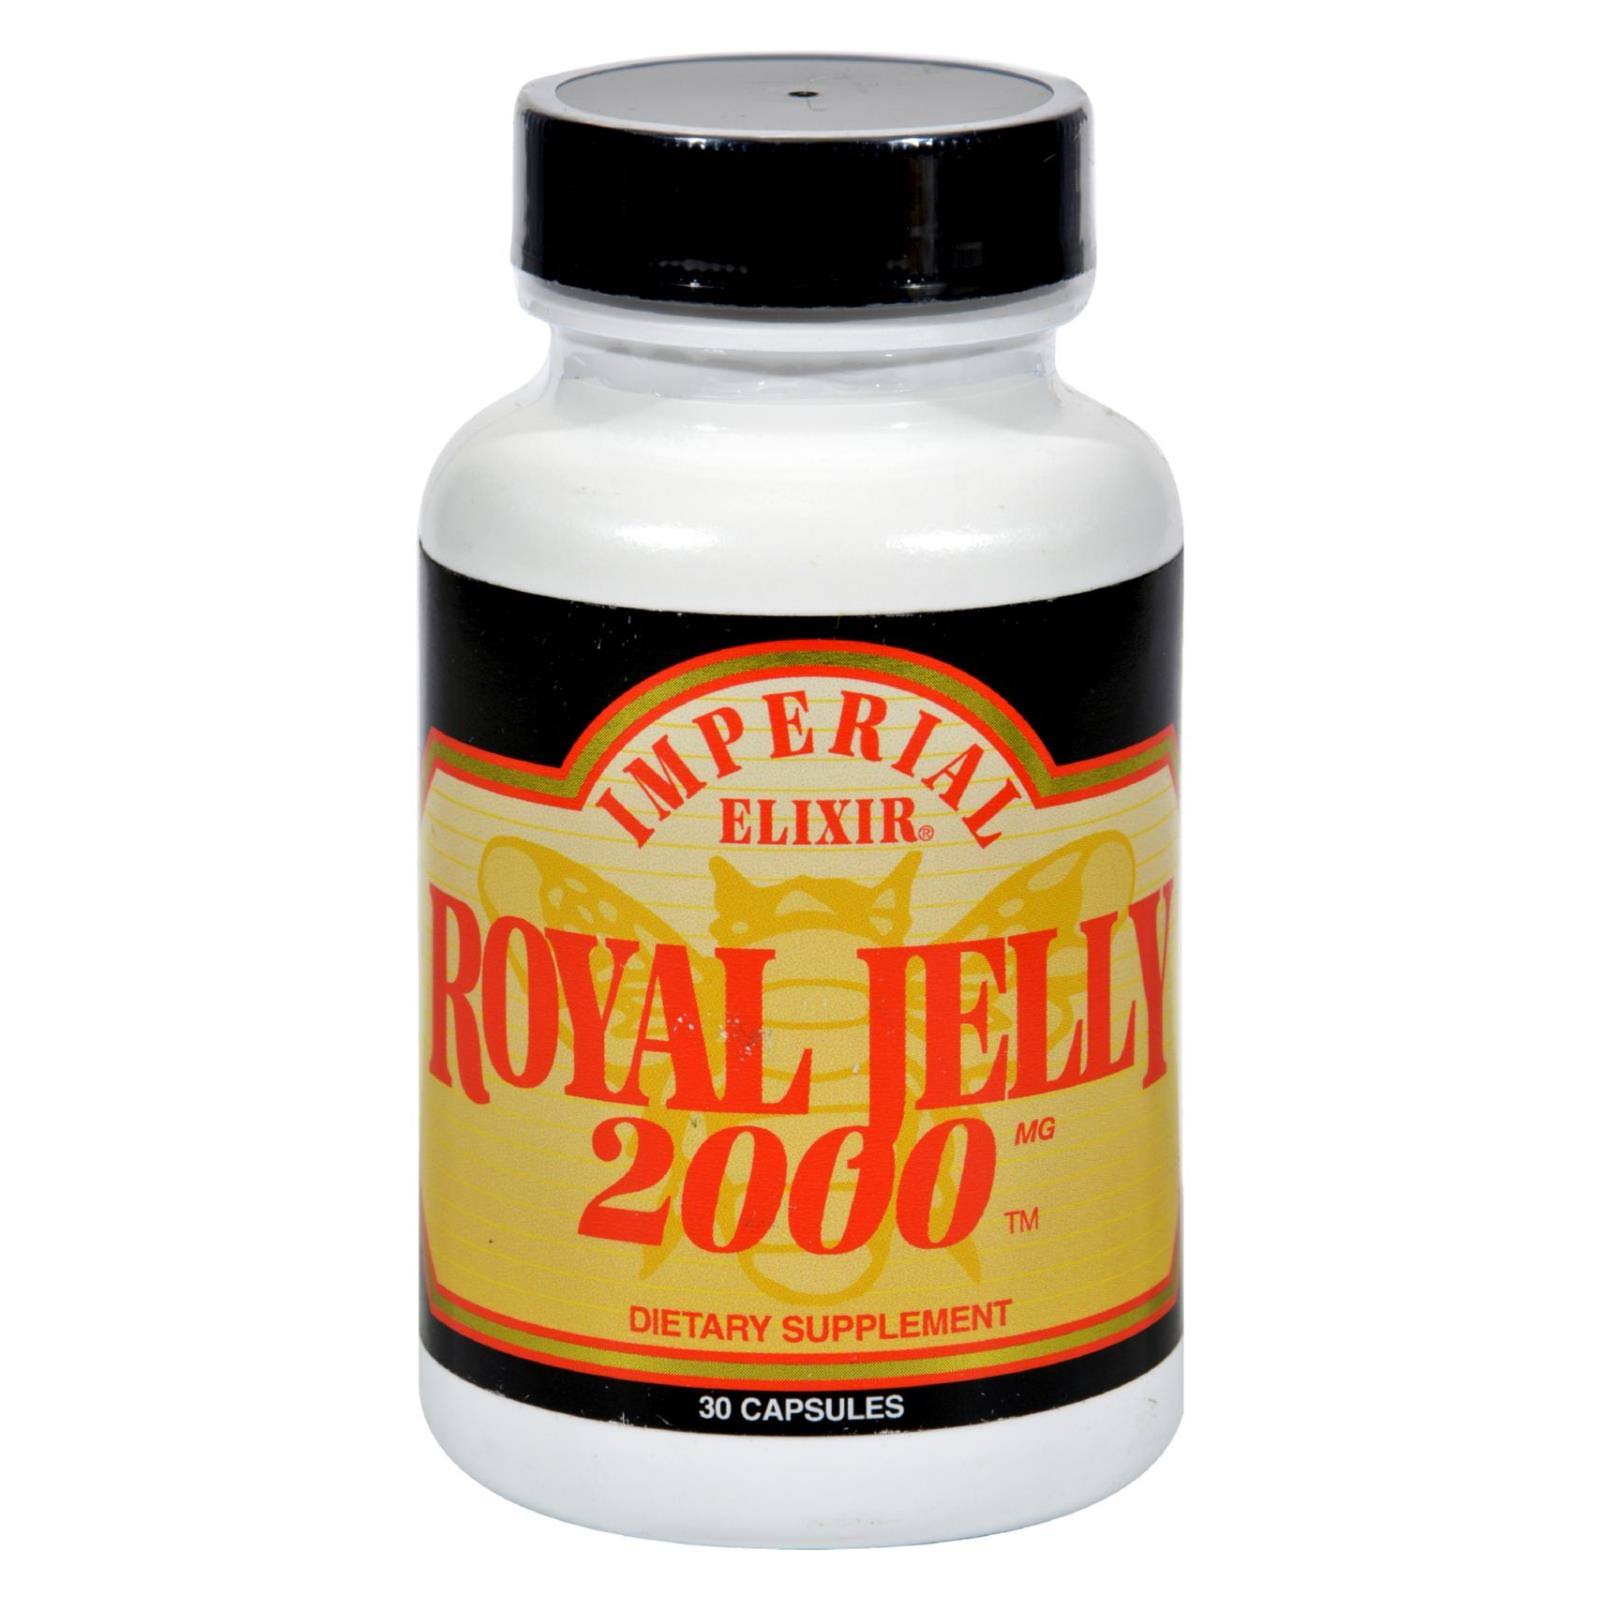 Imperial Elixir Royal Jelly Supplement - 2000mg, 30ct